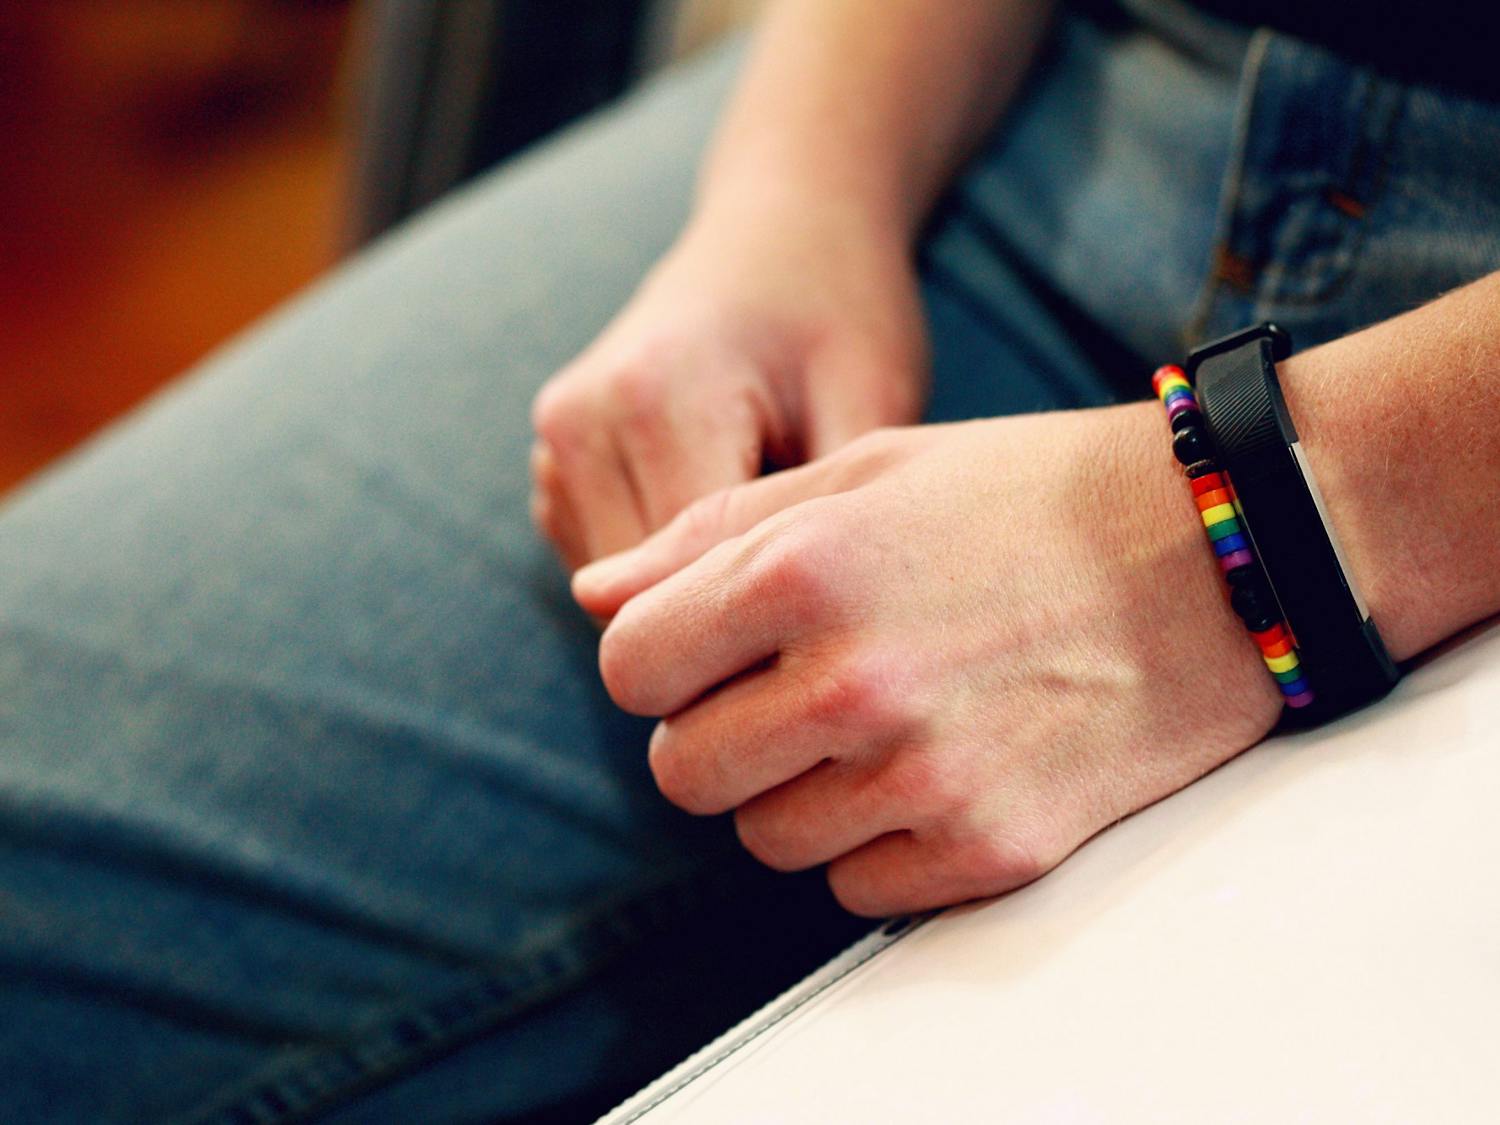 A person wears a bracelet and a FitBit on their left hand.